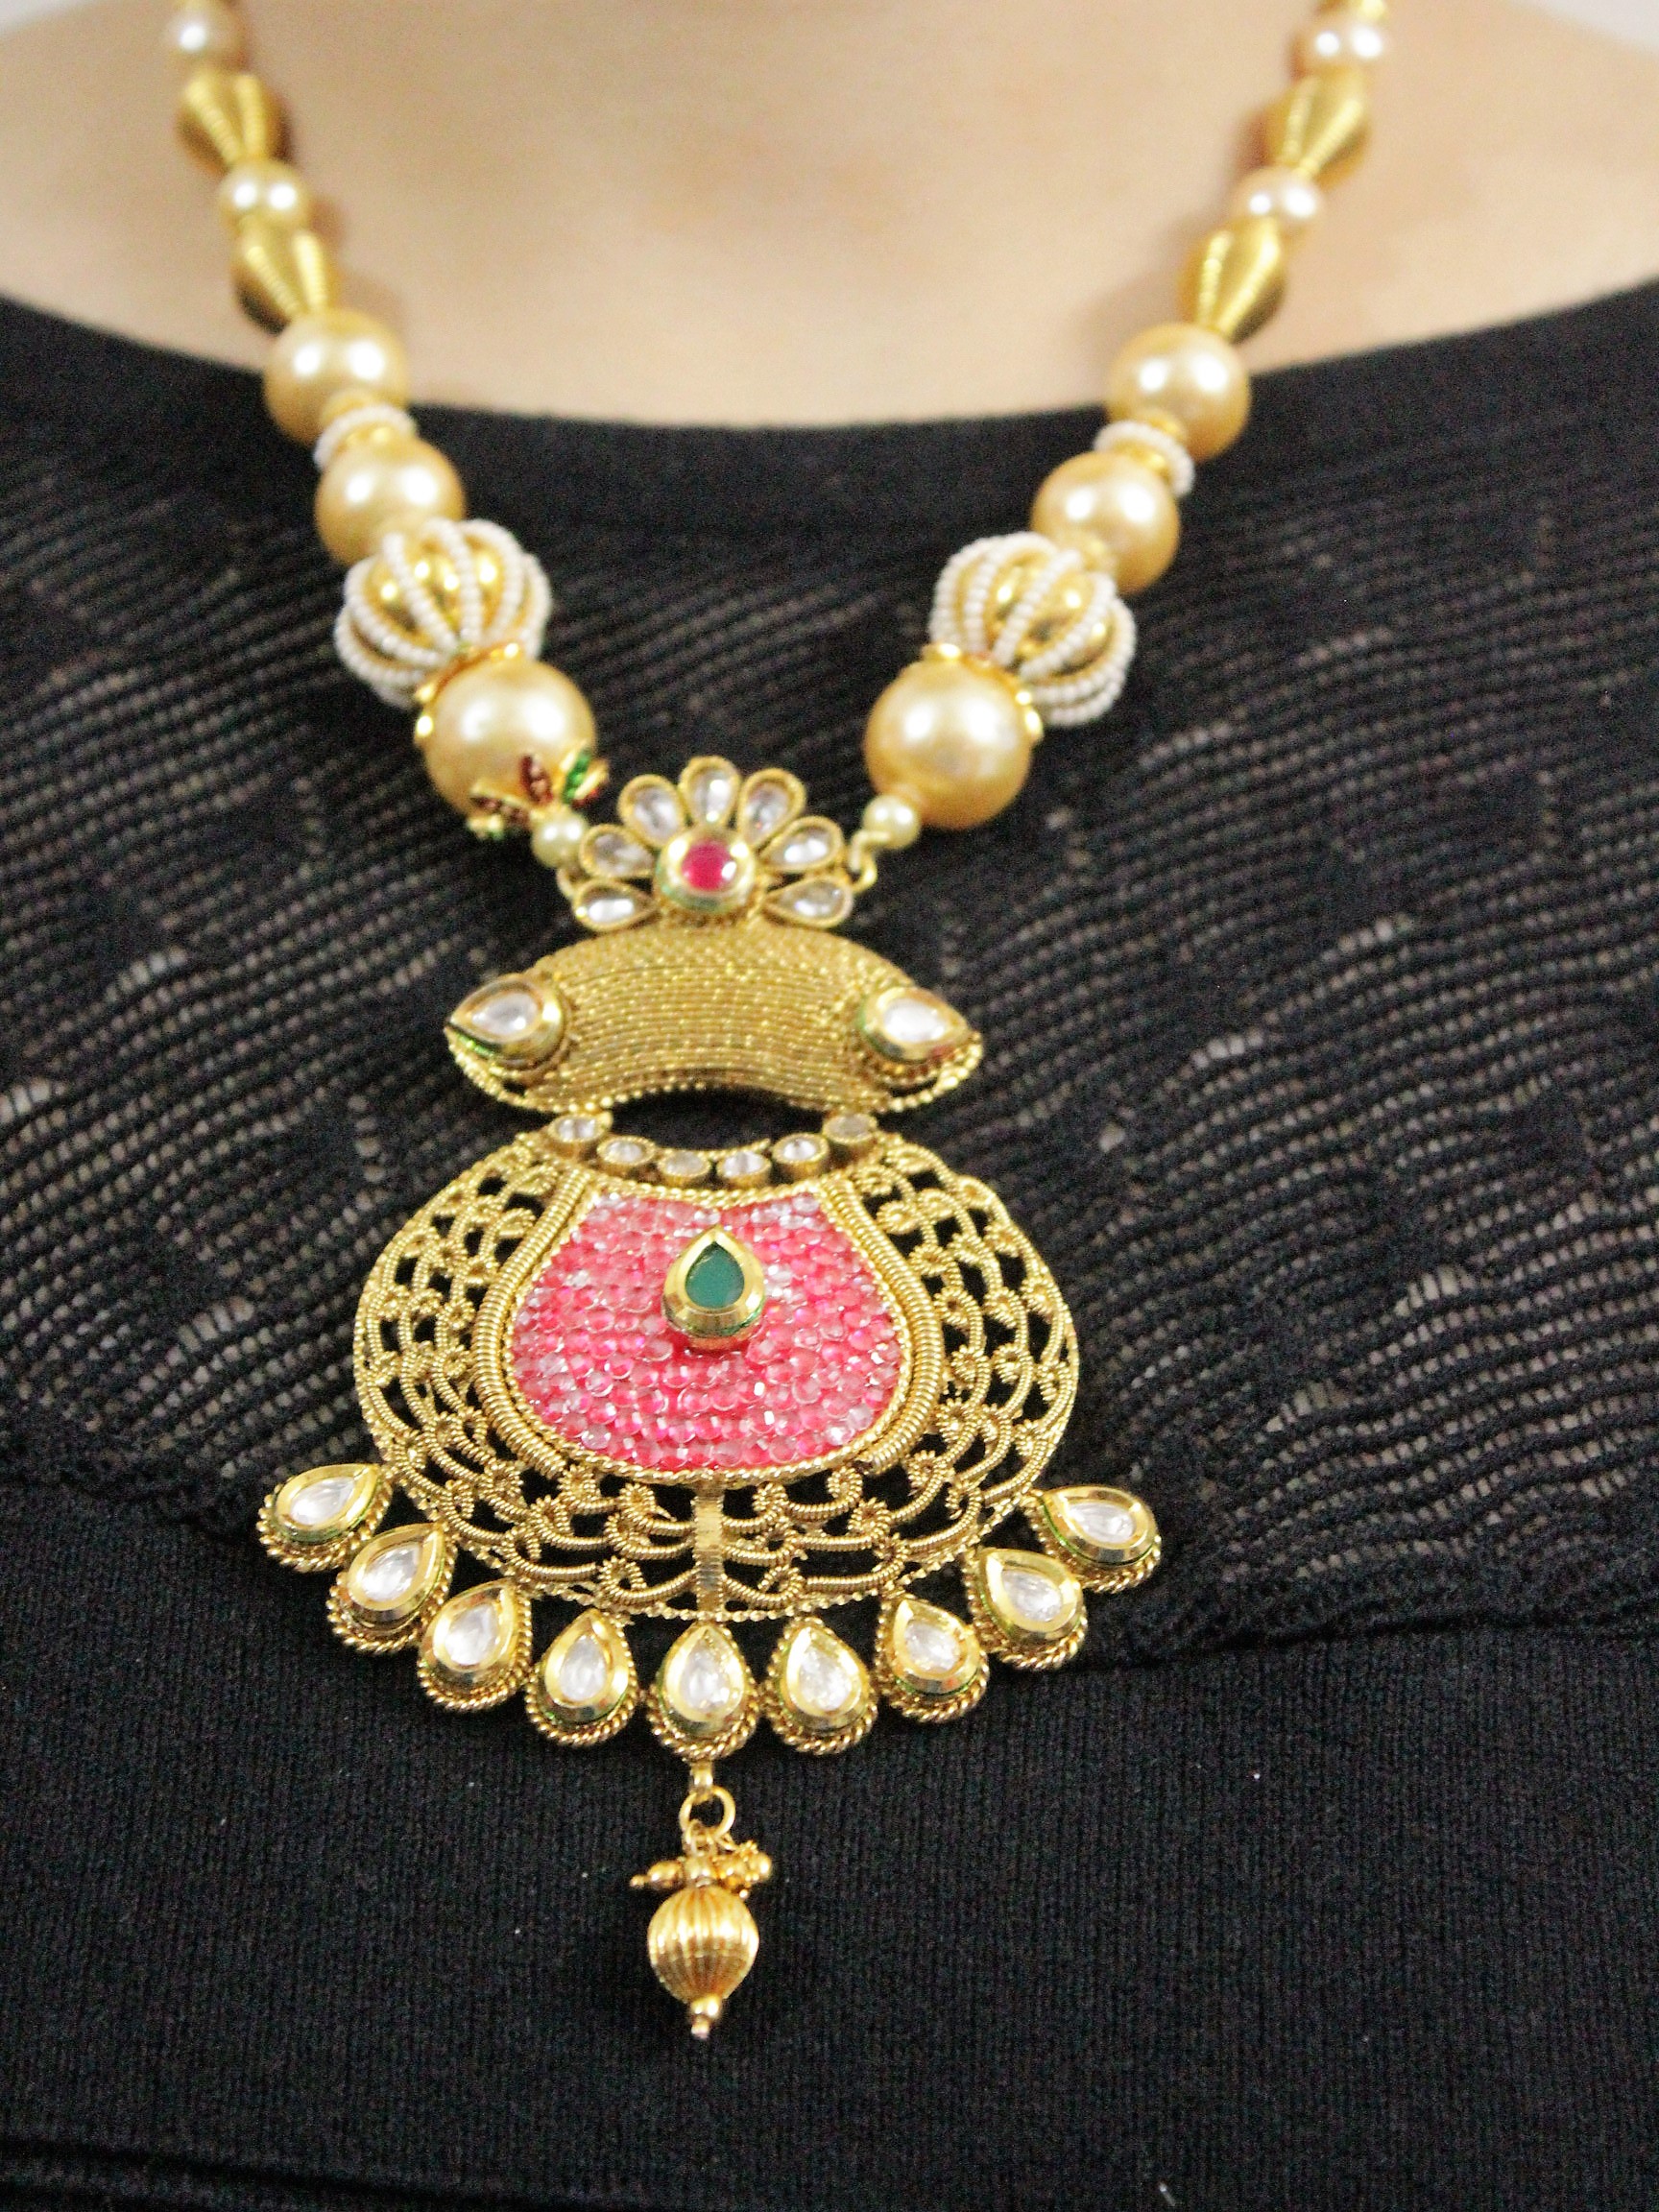 antique necklace set online shopping in patna  | IndiHaute | antique necklace set for bride in patna , antique necklace set for girl in patna , antique necklace set for lehenga in patna , antique necklace set for marriage in patna  - GL82771